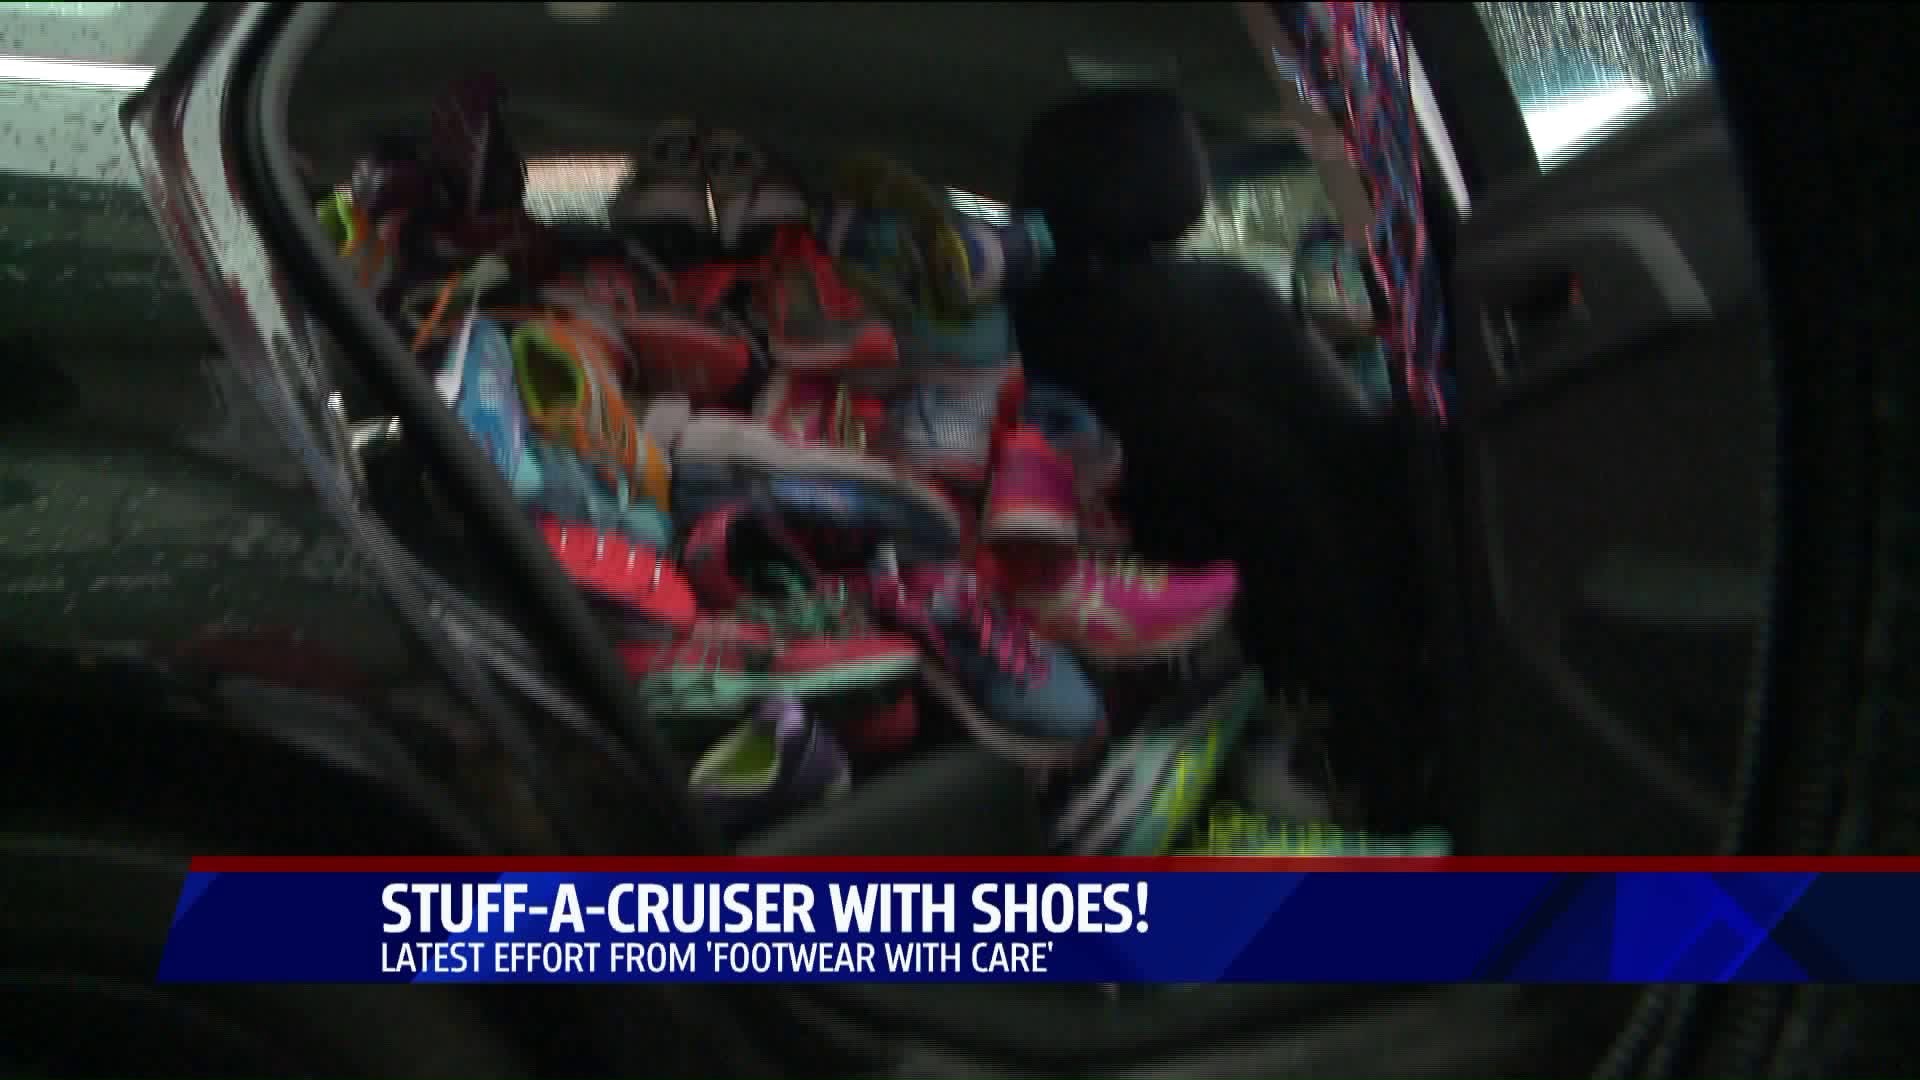 A local event donates hundreds of sneakers to the homeless in Hartford